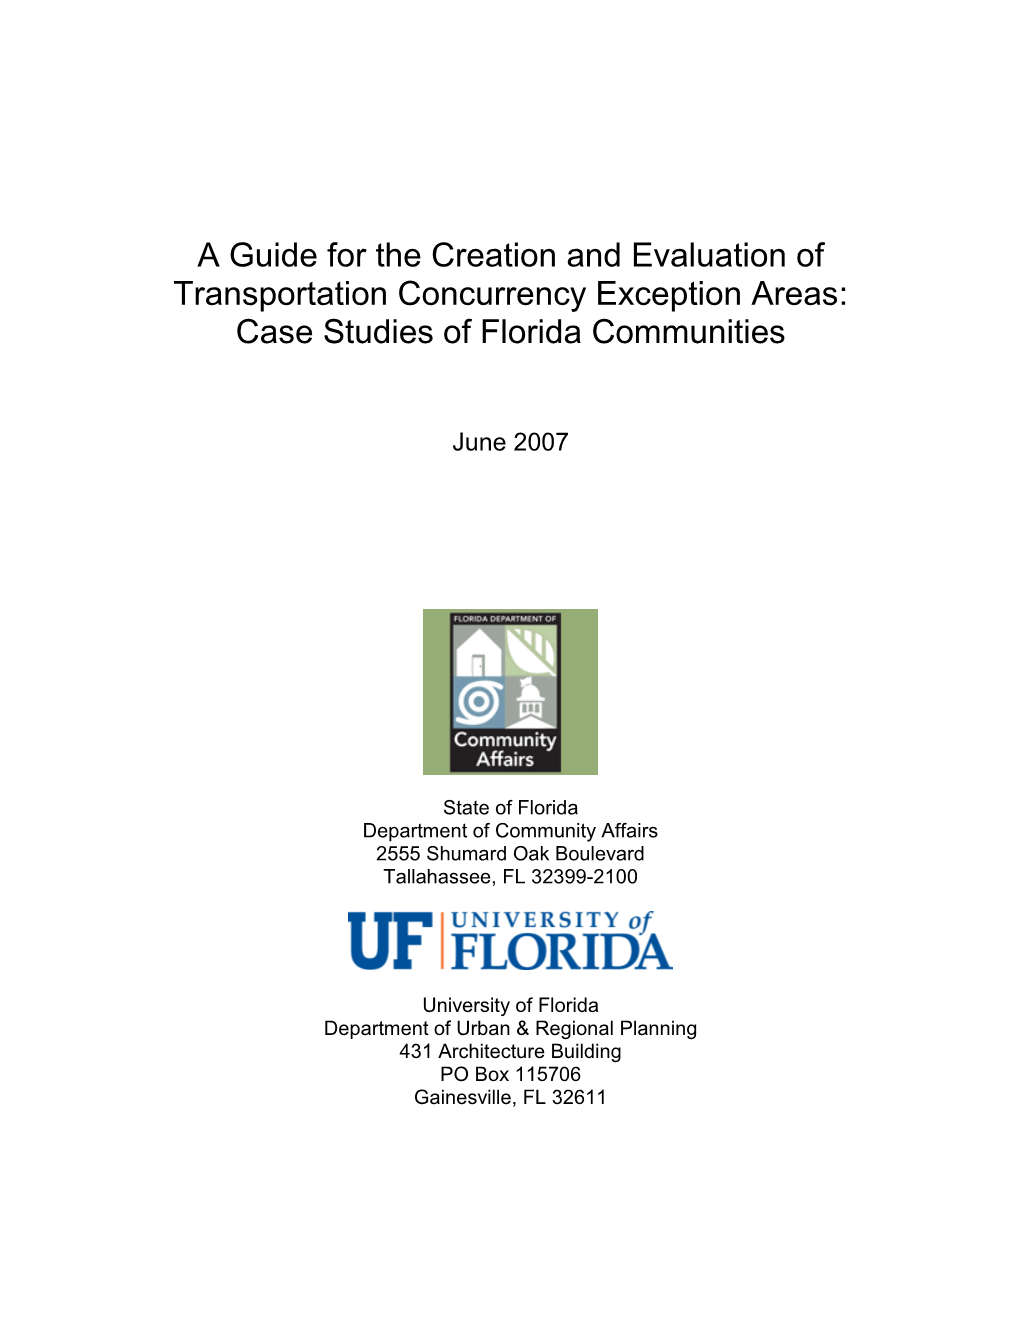 Section 7: Case Study: Select Cities in Miami-Dade County